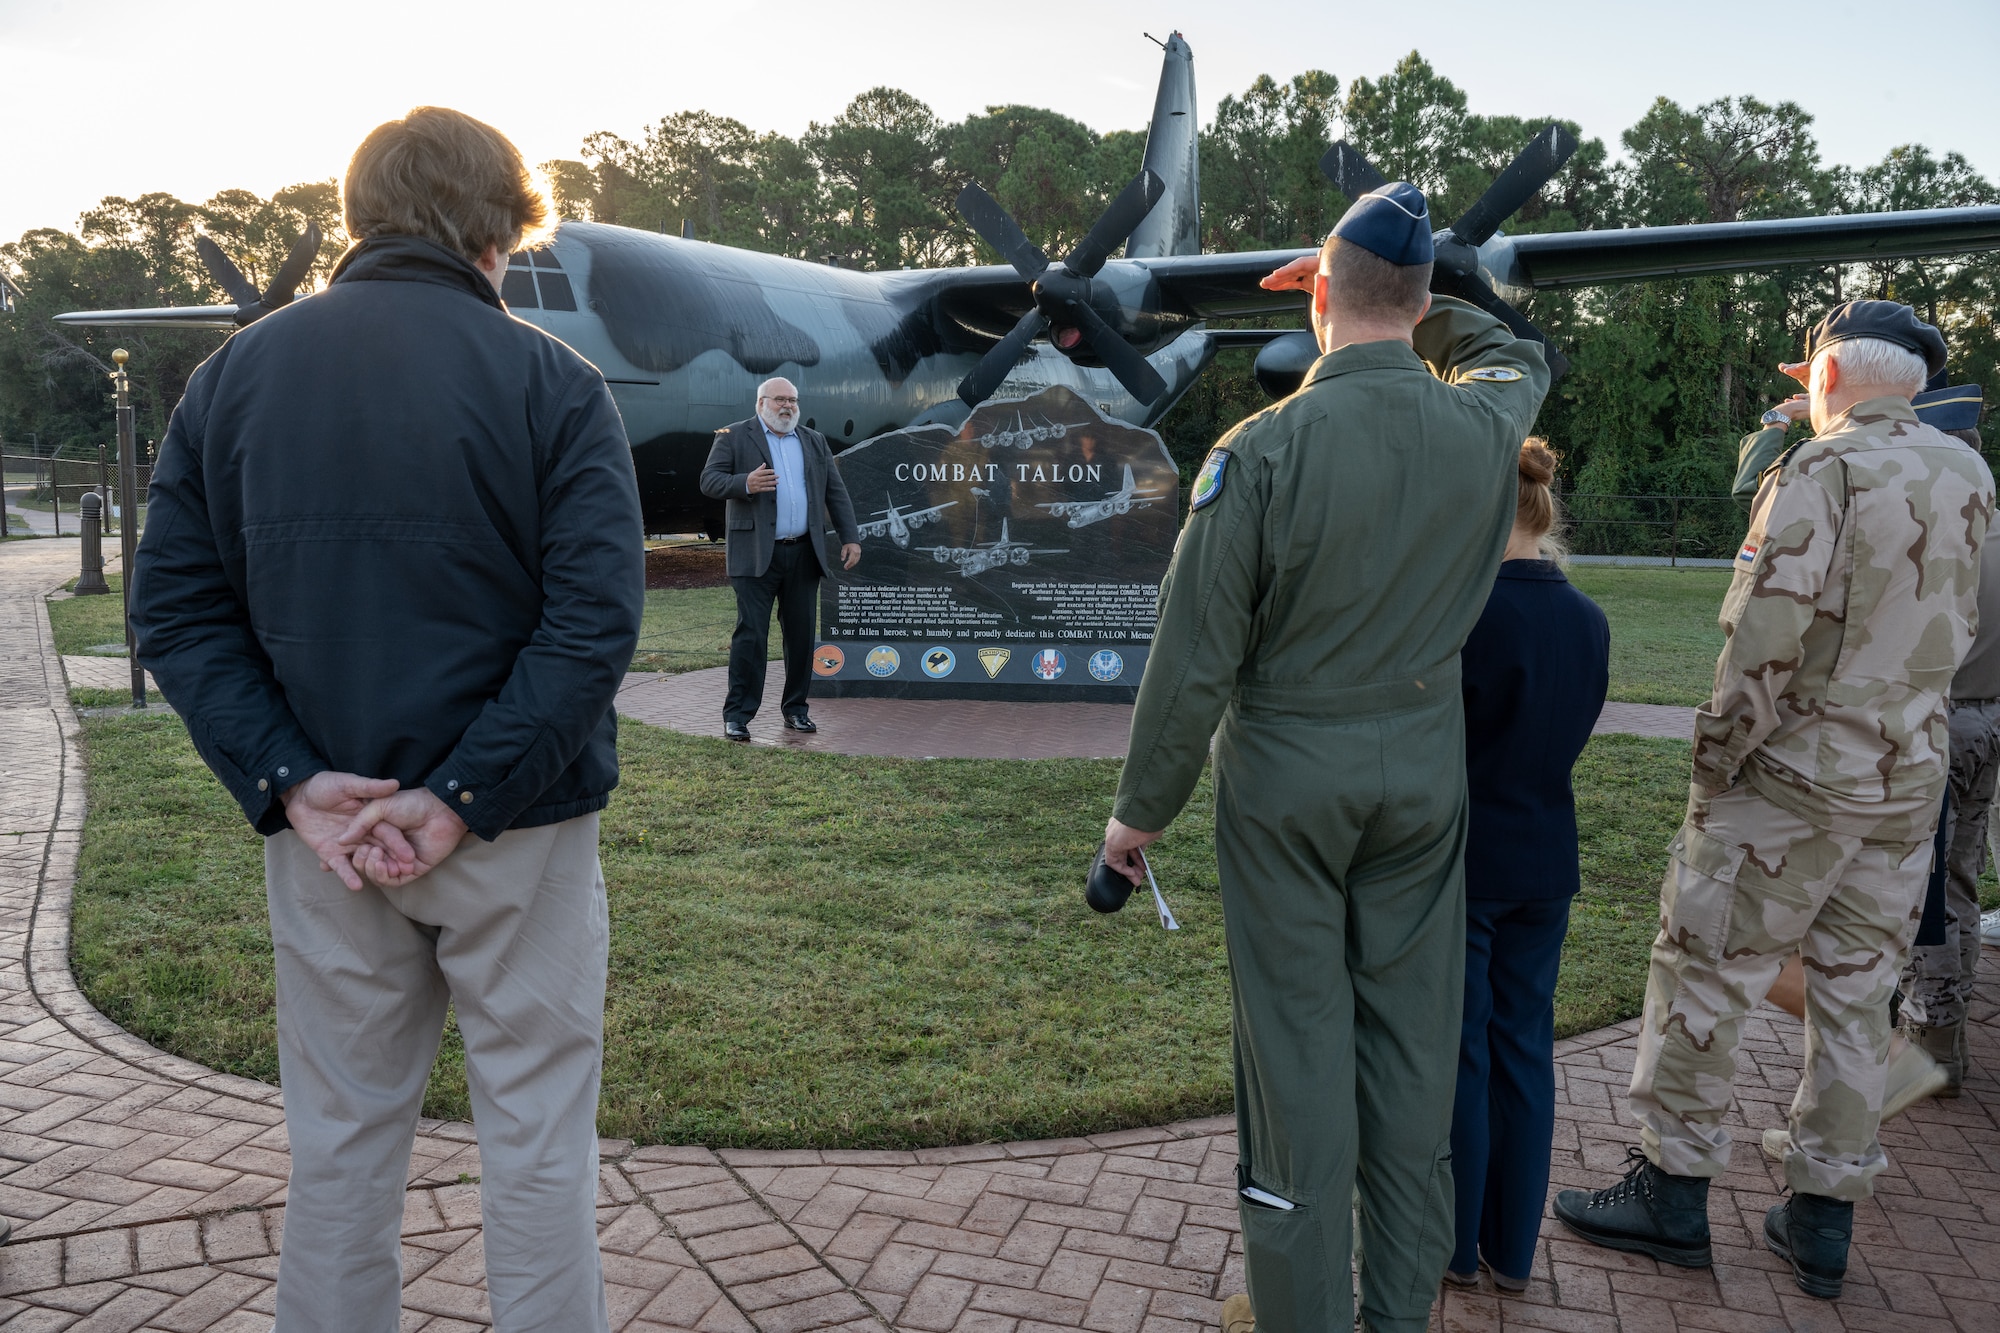 Foreign Air Attaché attendees visit Hurlburt Field, Florida, Oct. 23, 2023. This visit provided a unique opportunity to educate the visiting members on AFSOC's capabilities and build a foundation for future operations. (U.S. Air Force Photo by Airman 1st Class Hussein Enaya)